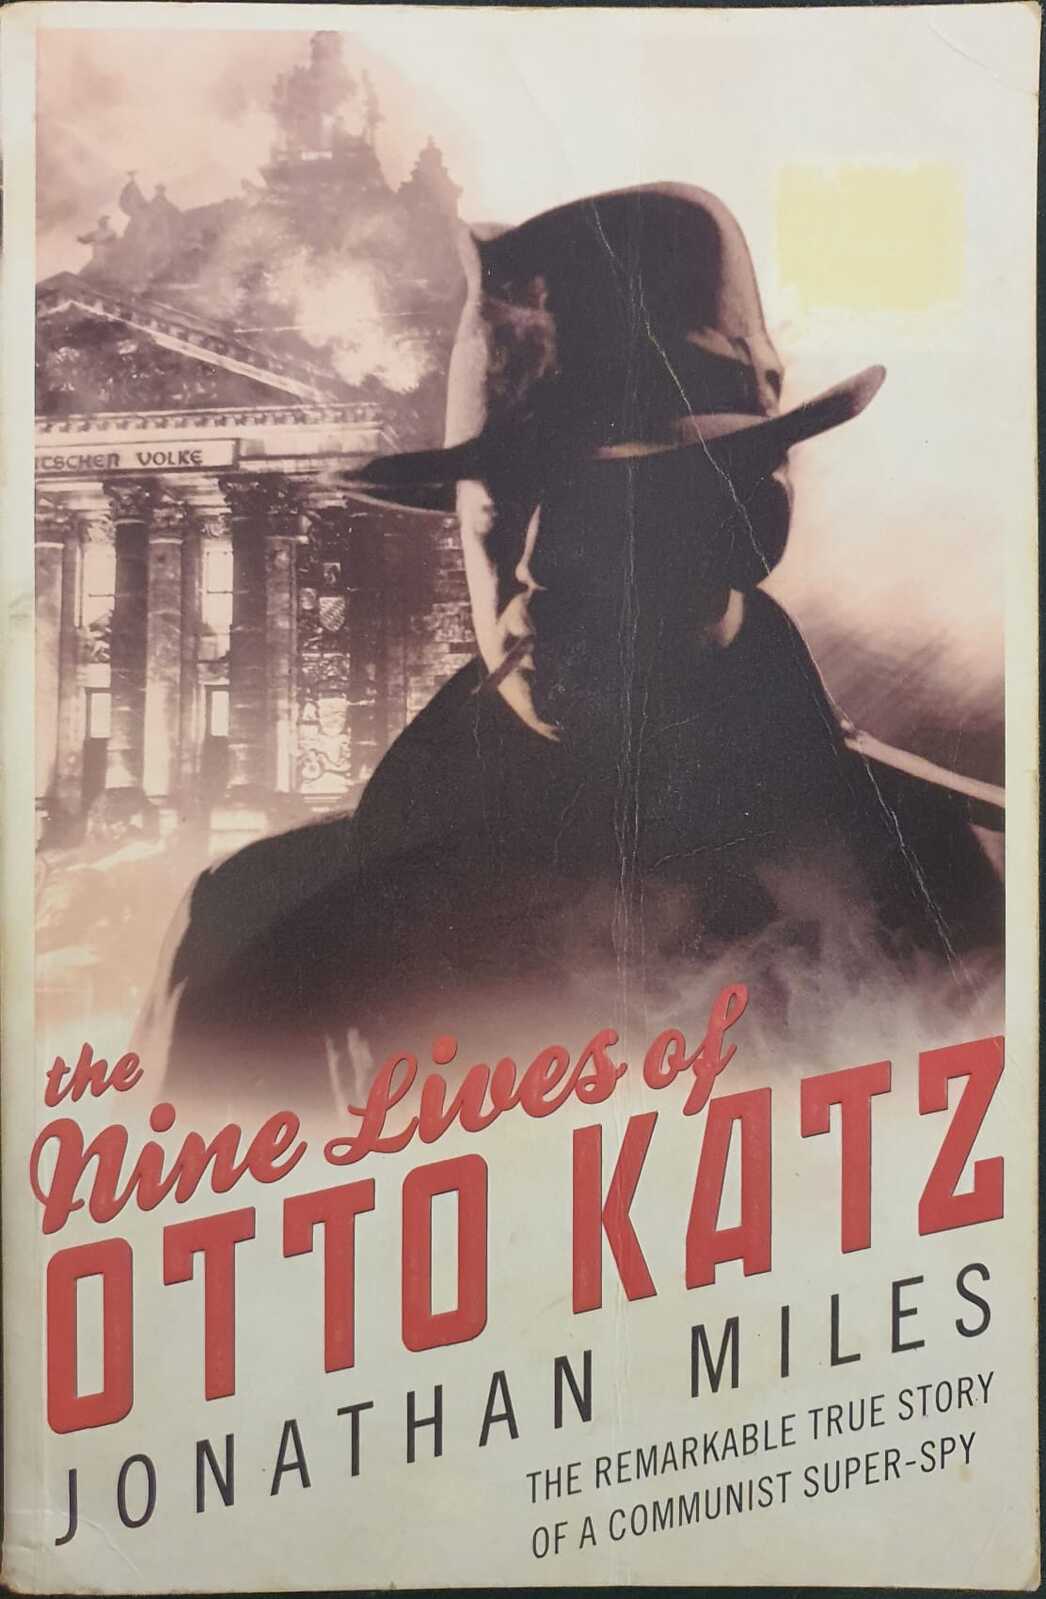 The Nine Lives of Otto Katz by Jonathan Miles: stock image of front cover.